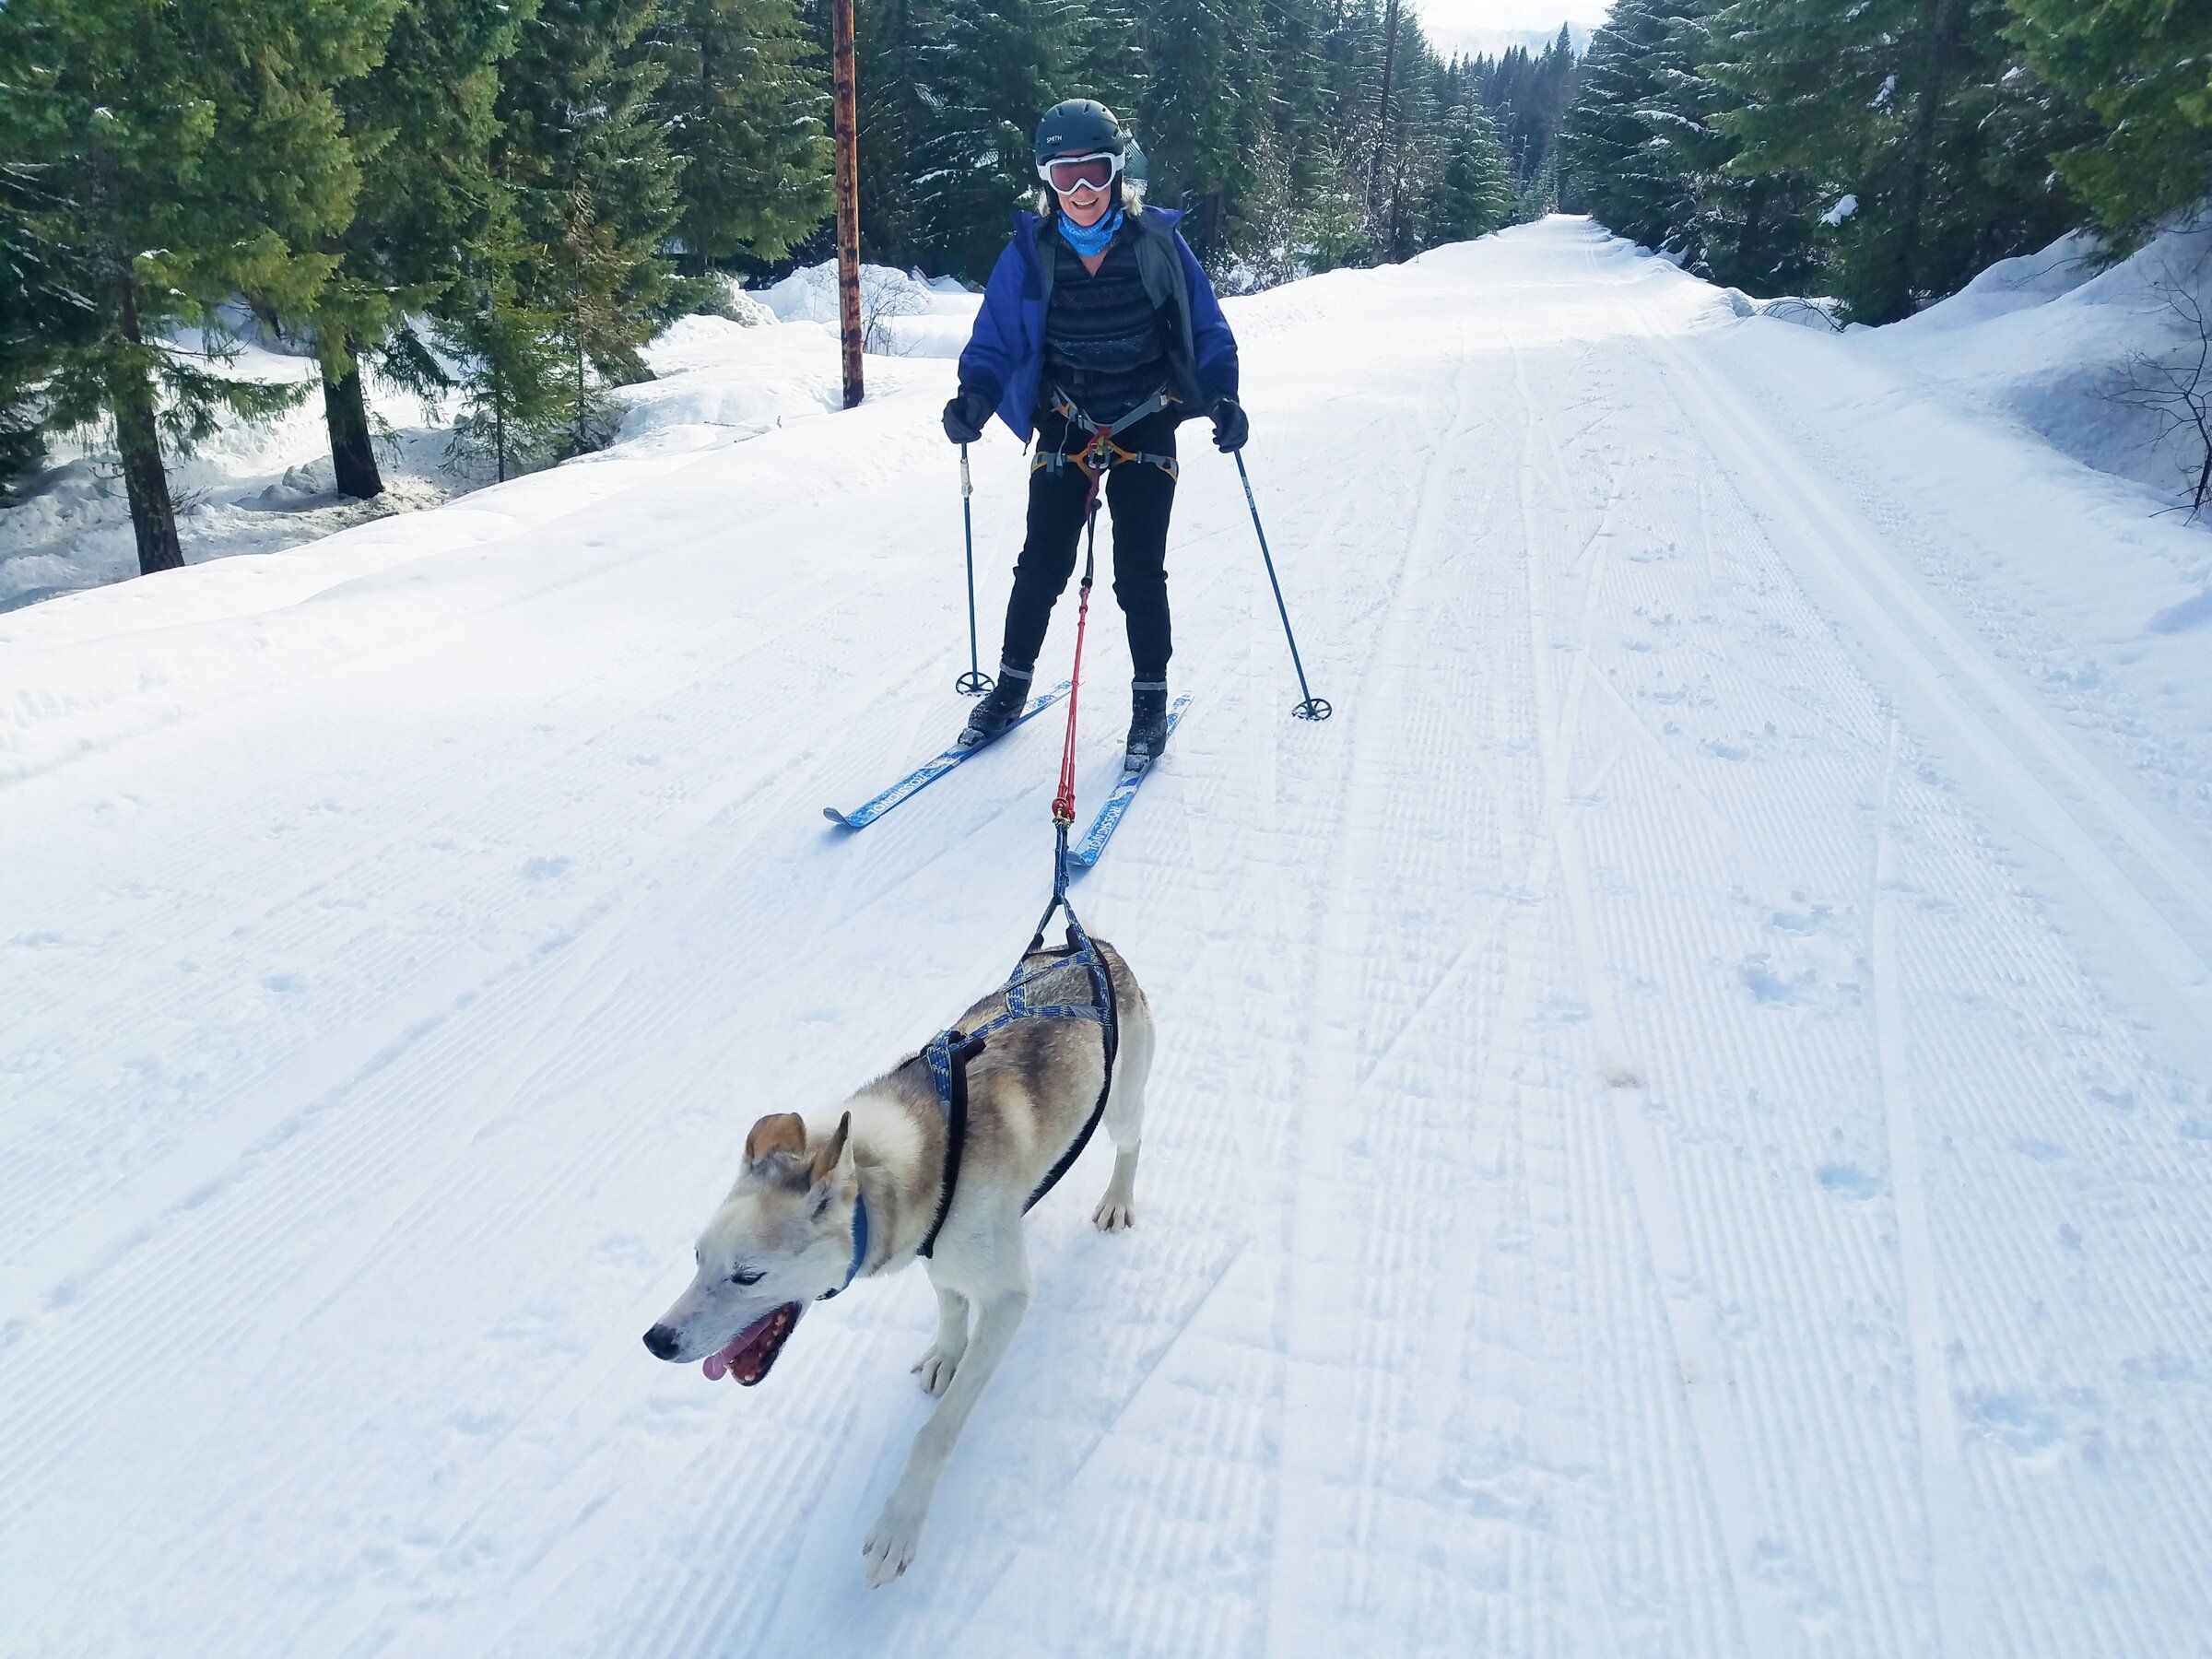 Want to take the dog cross-country skiing? Try this Nordic winter sport The Seattle Times